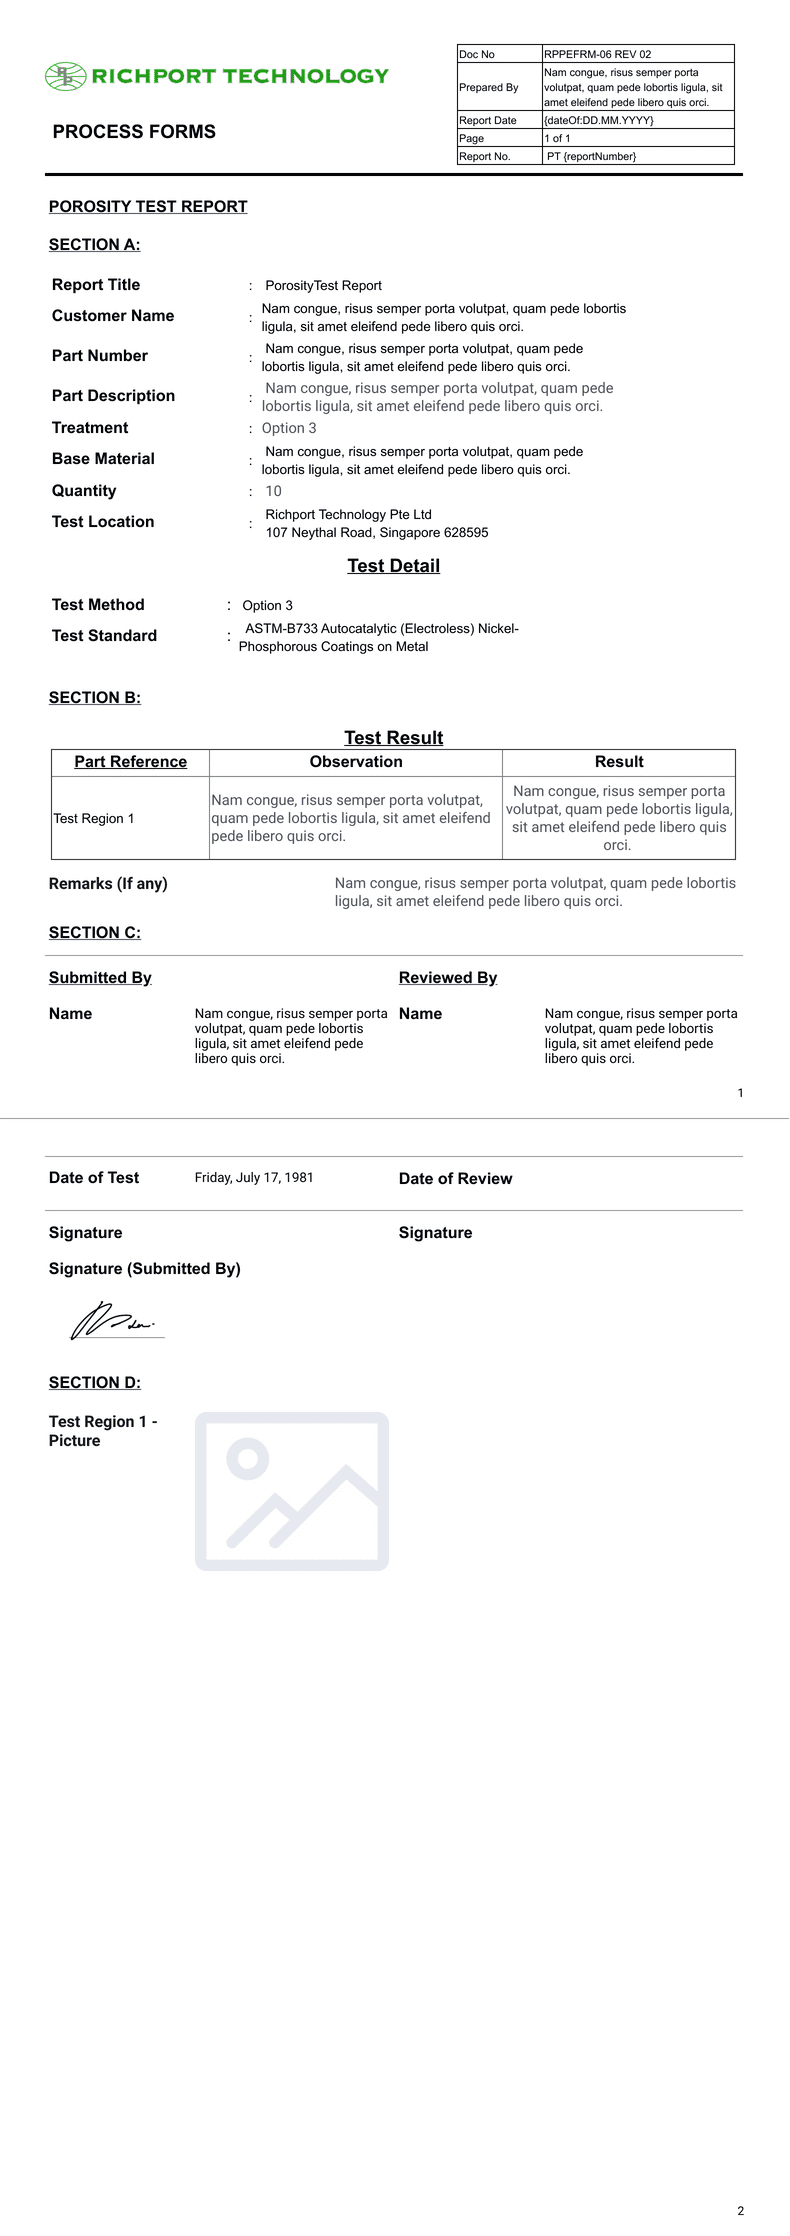 PDF Templates: TEMPLATE for Reports